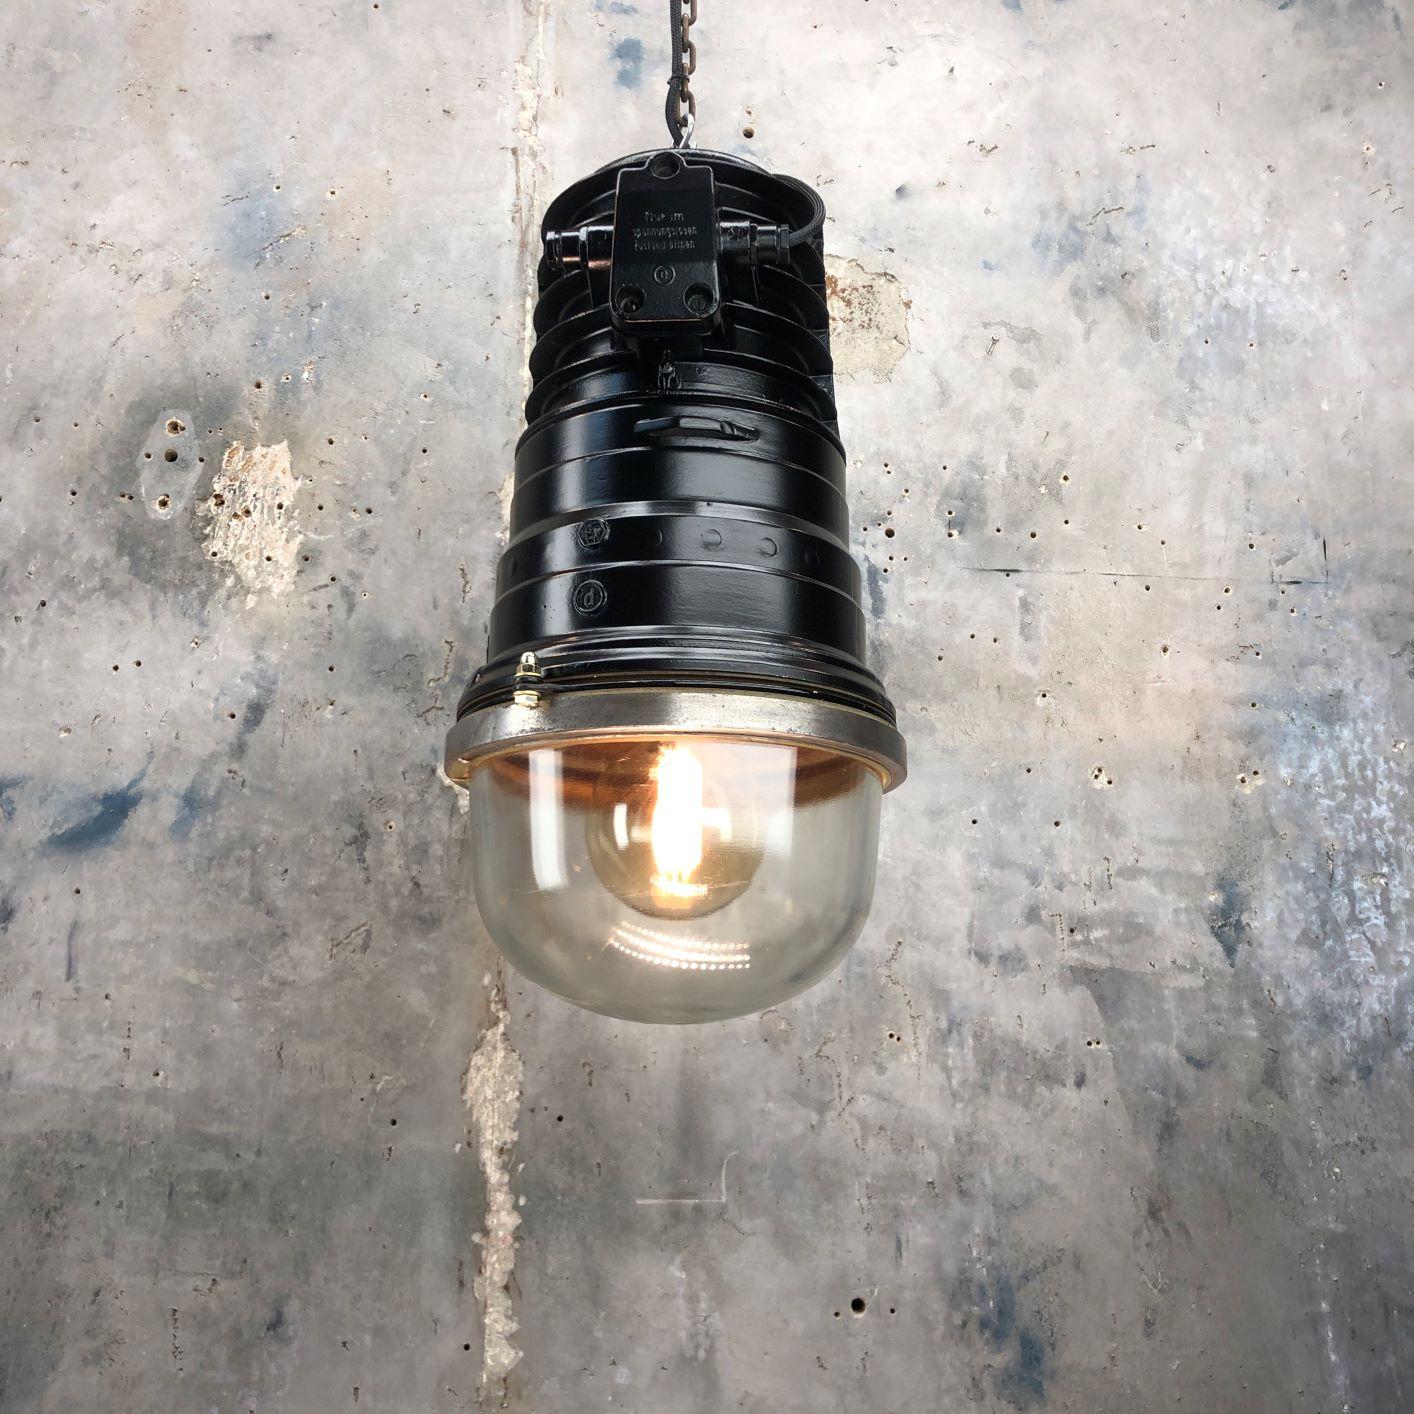 A vintage industrial large cast aluminium explosion proof ceiling pendant by EOW fitted with energy saving LED light bulb and painted satin black. 

Reclaimed and professionally restored by Loomlight in UK for modern interiors. 

There are Atex (Ex)